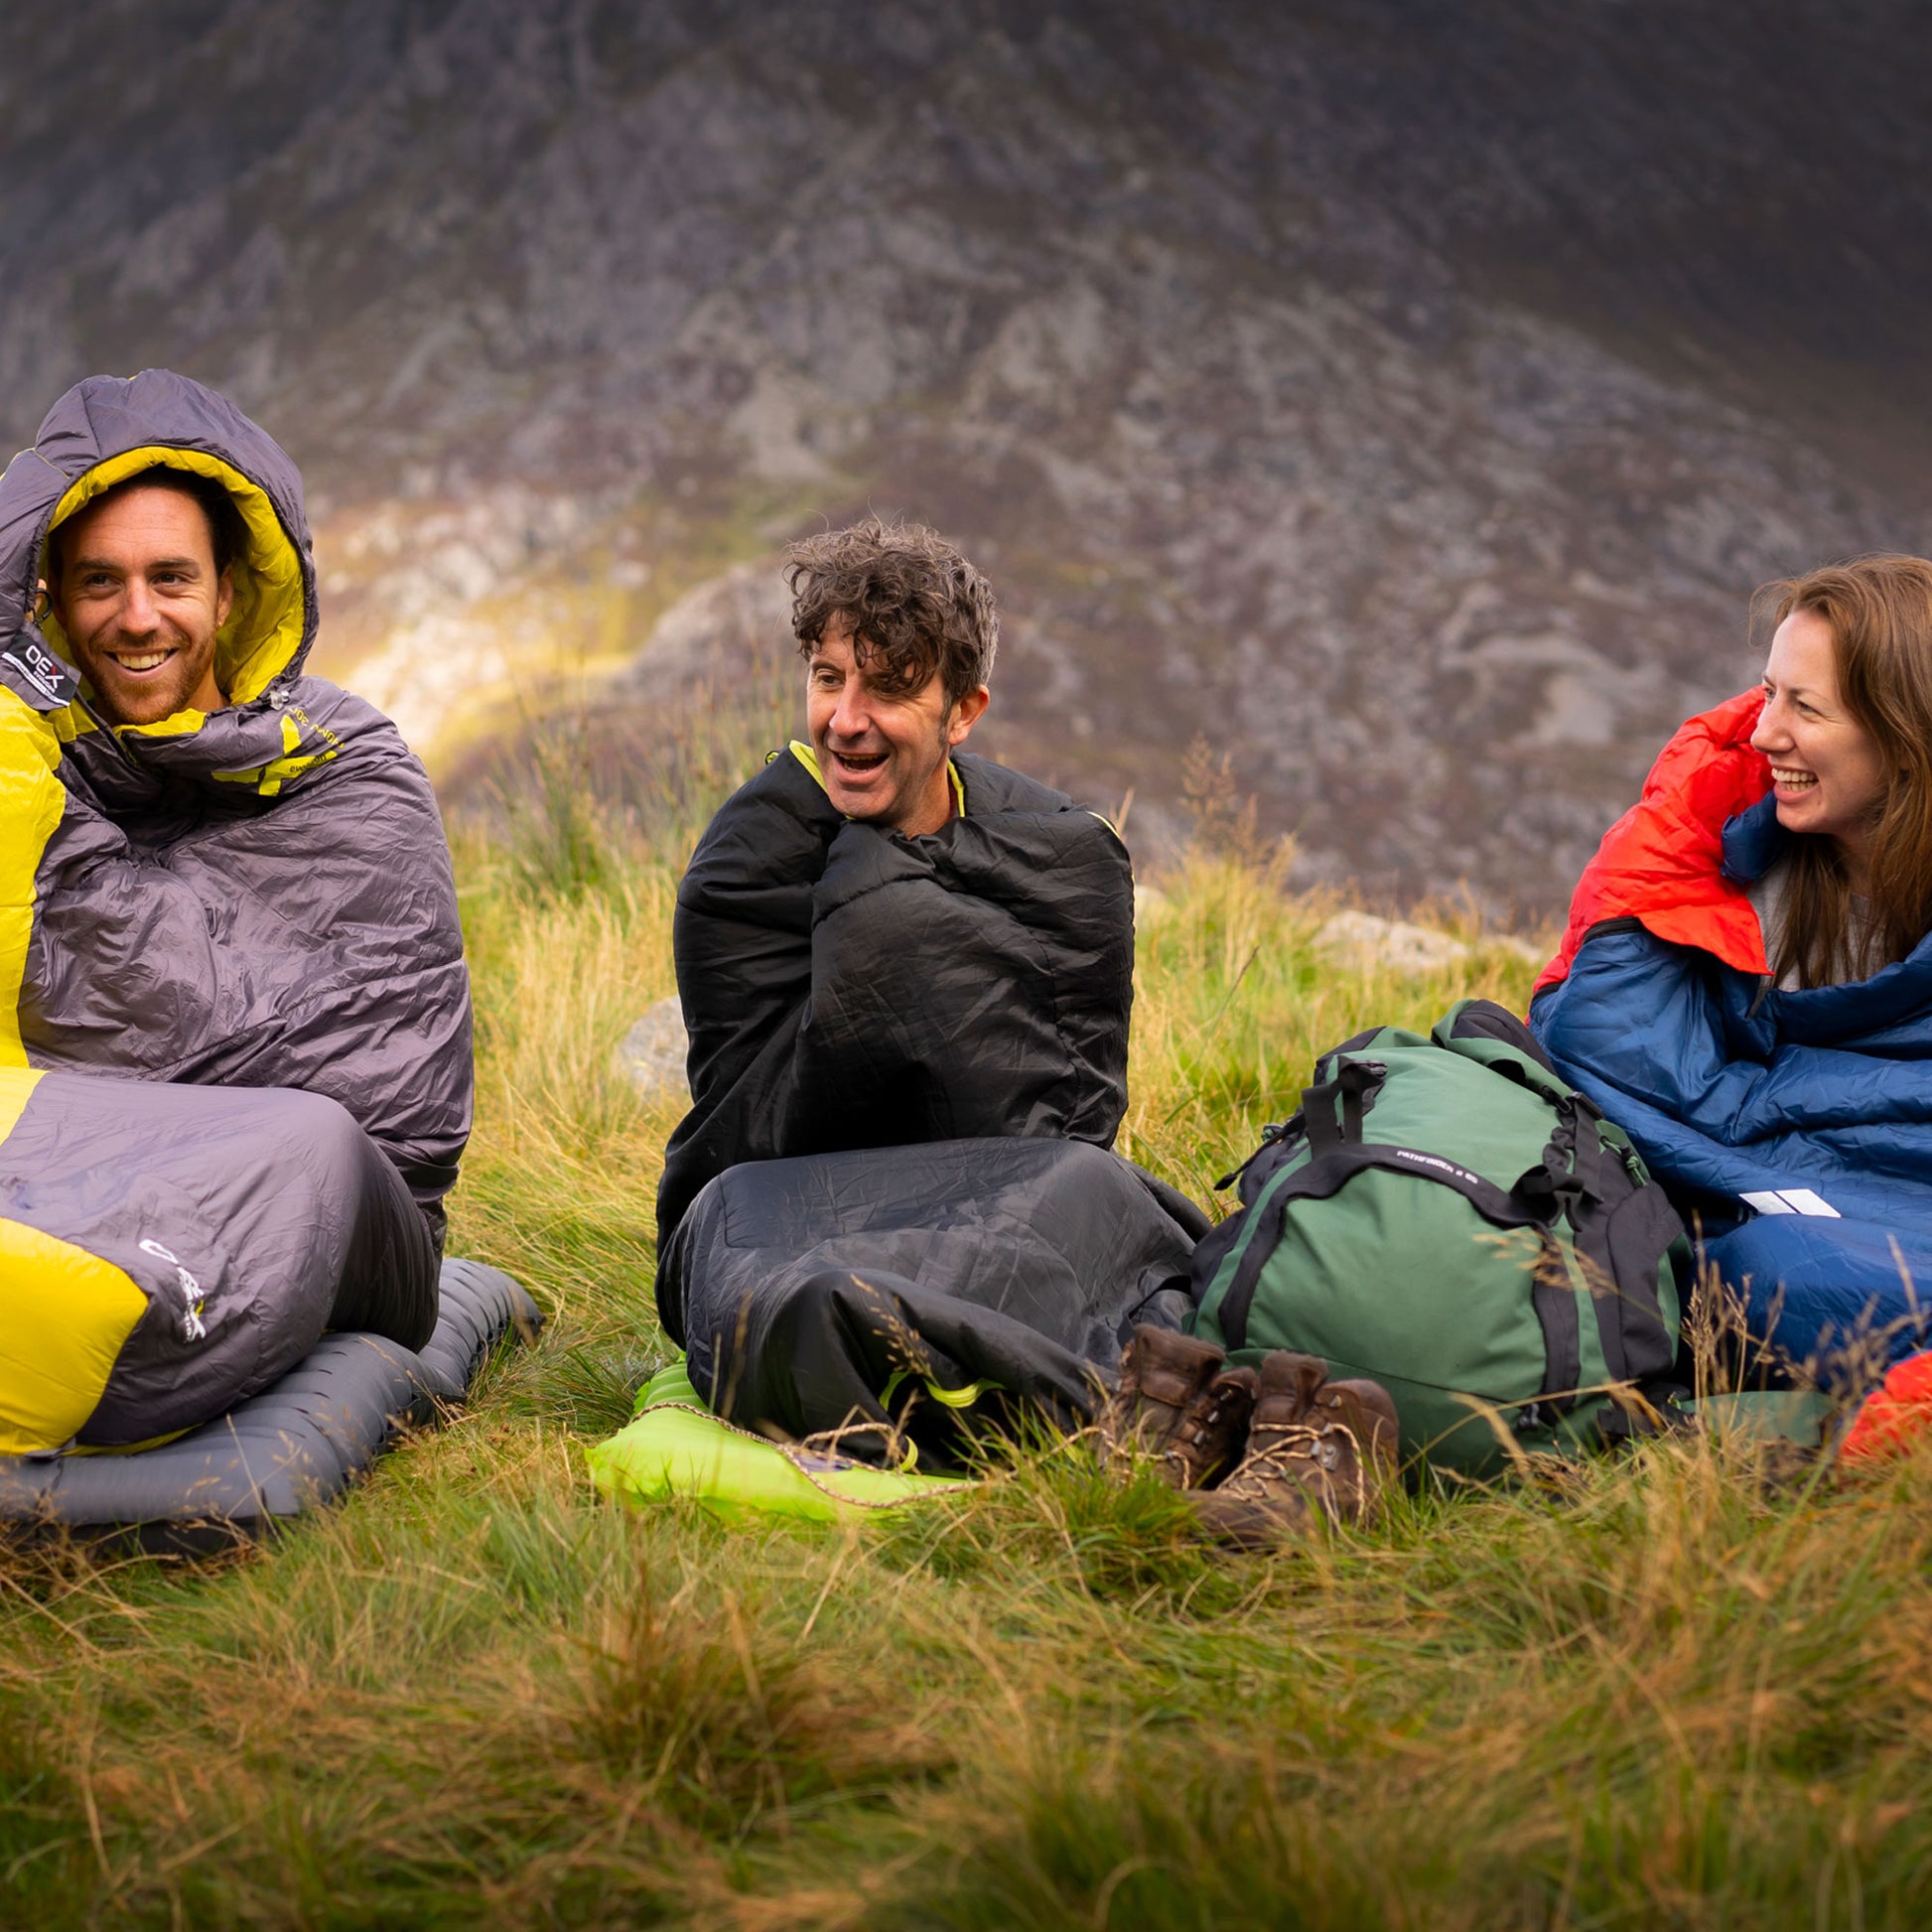 Image of backpackers and hikers in sleeping bags.